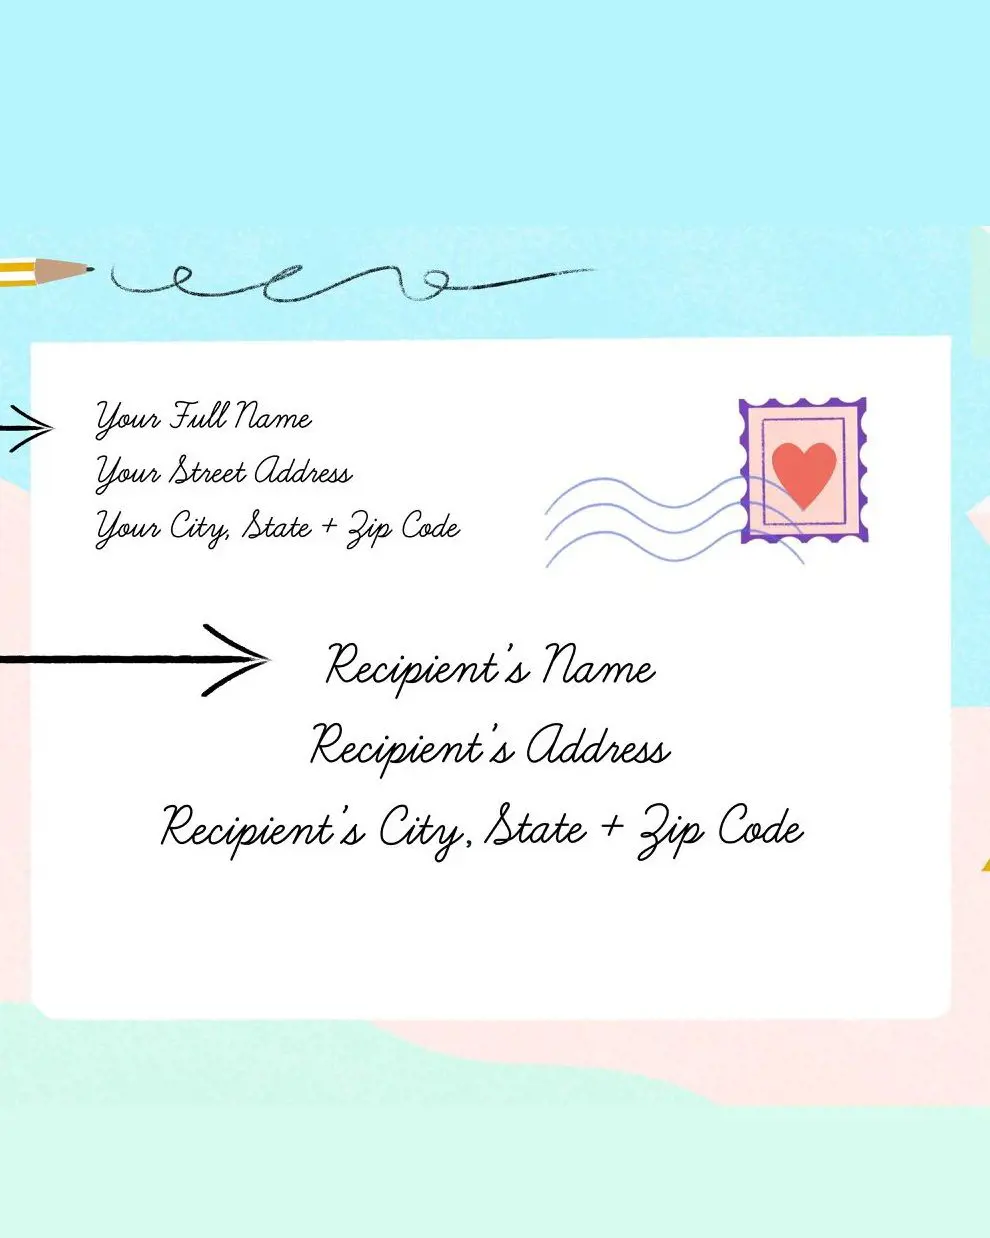 An envelope addressing requires three key components: the sender's address, the recipient's address, and a postage stamp